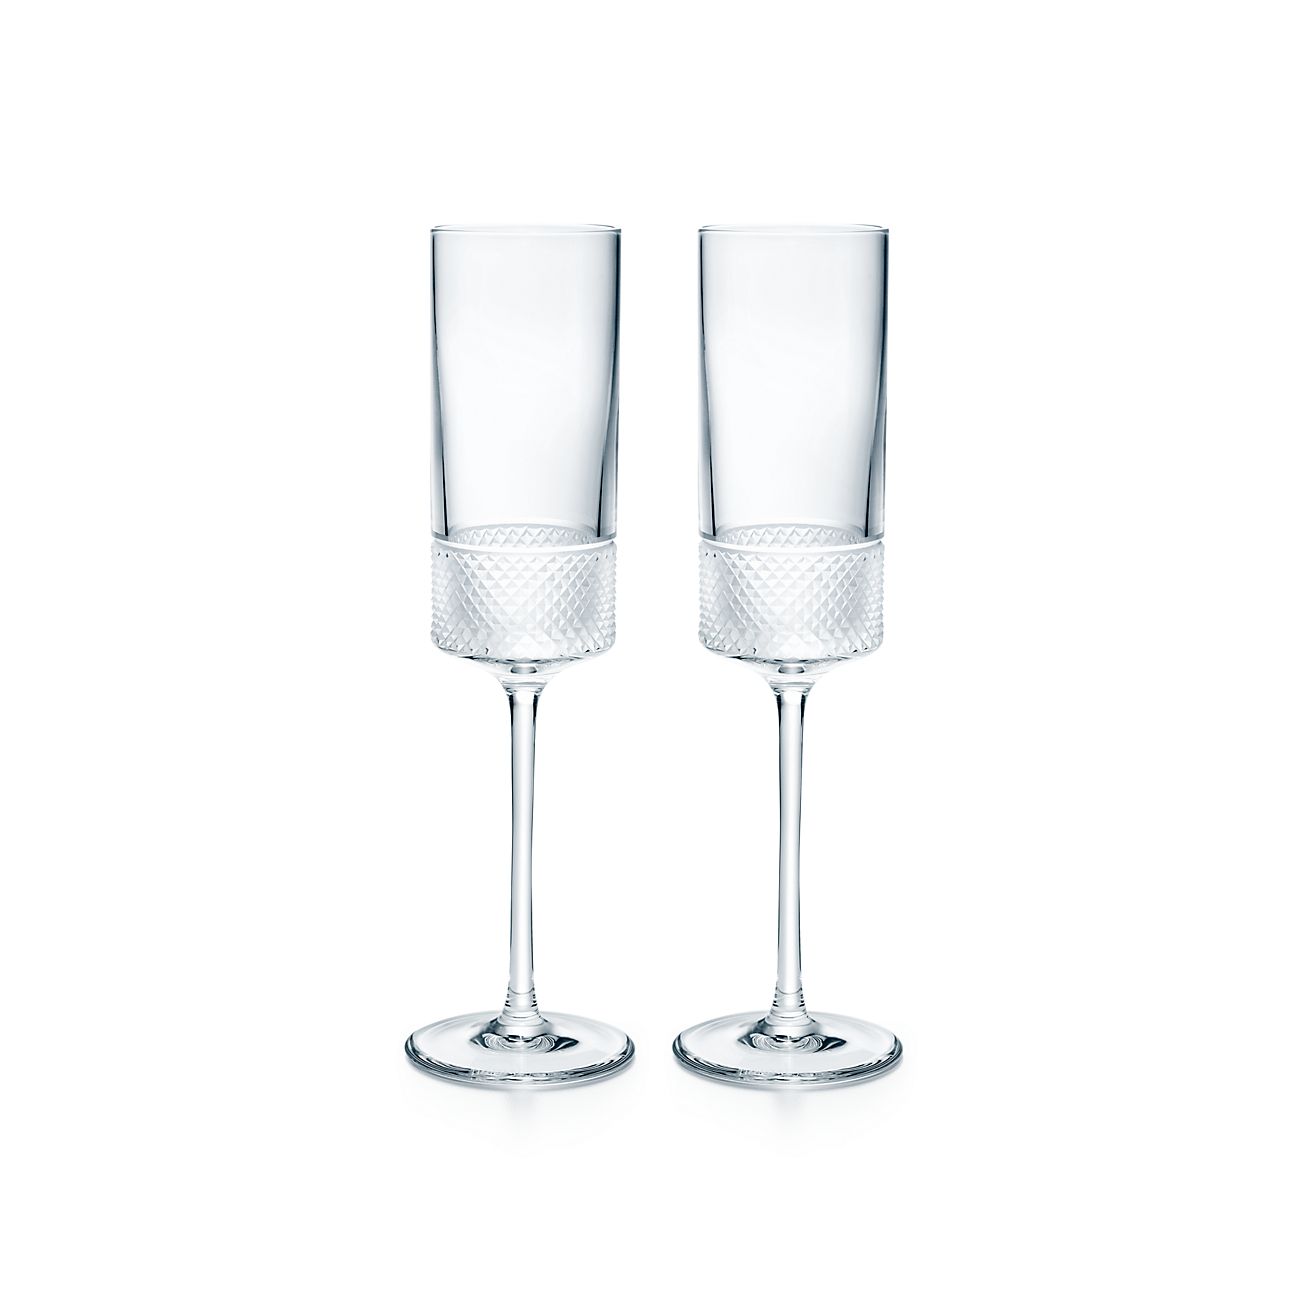 Diamond Point champagne flutes in 